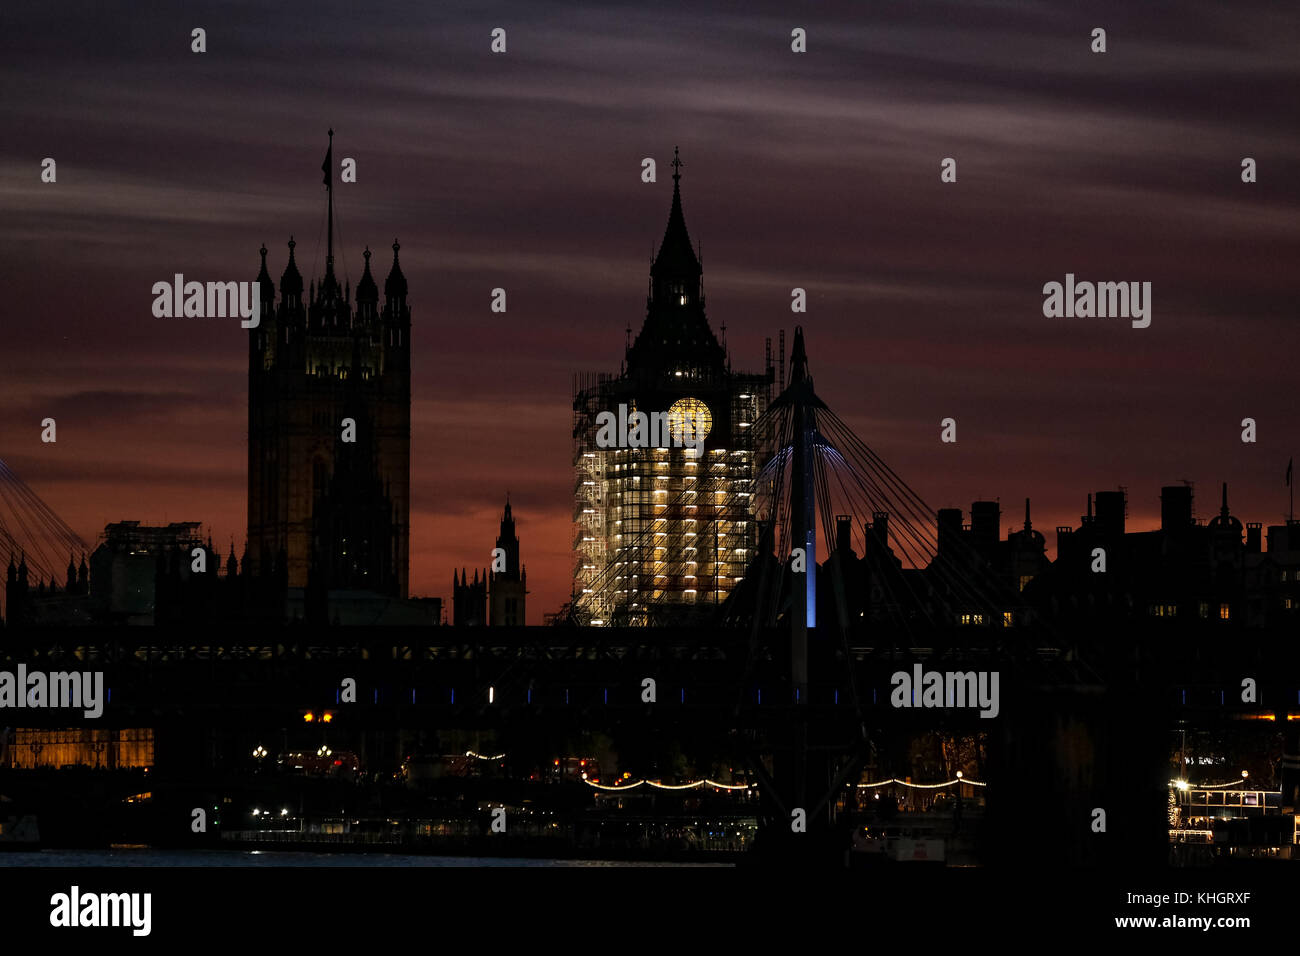 Friday 17th November 2017. London England. London is greeted with a wonderful sunset to mark the end of Friday as commuters come out of work and stop to photograph the spectacle. Elizabeth Tower( Big Ben) clock face peeks out from the scaffolding surrounding the tower. Paul Watts/ Alamy live news Stock Photo